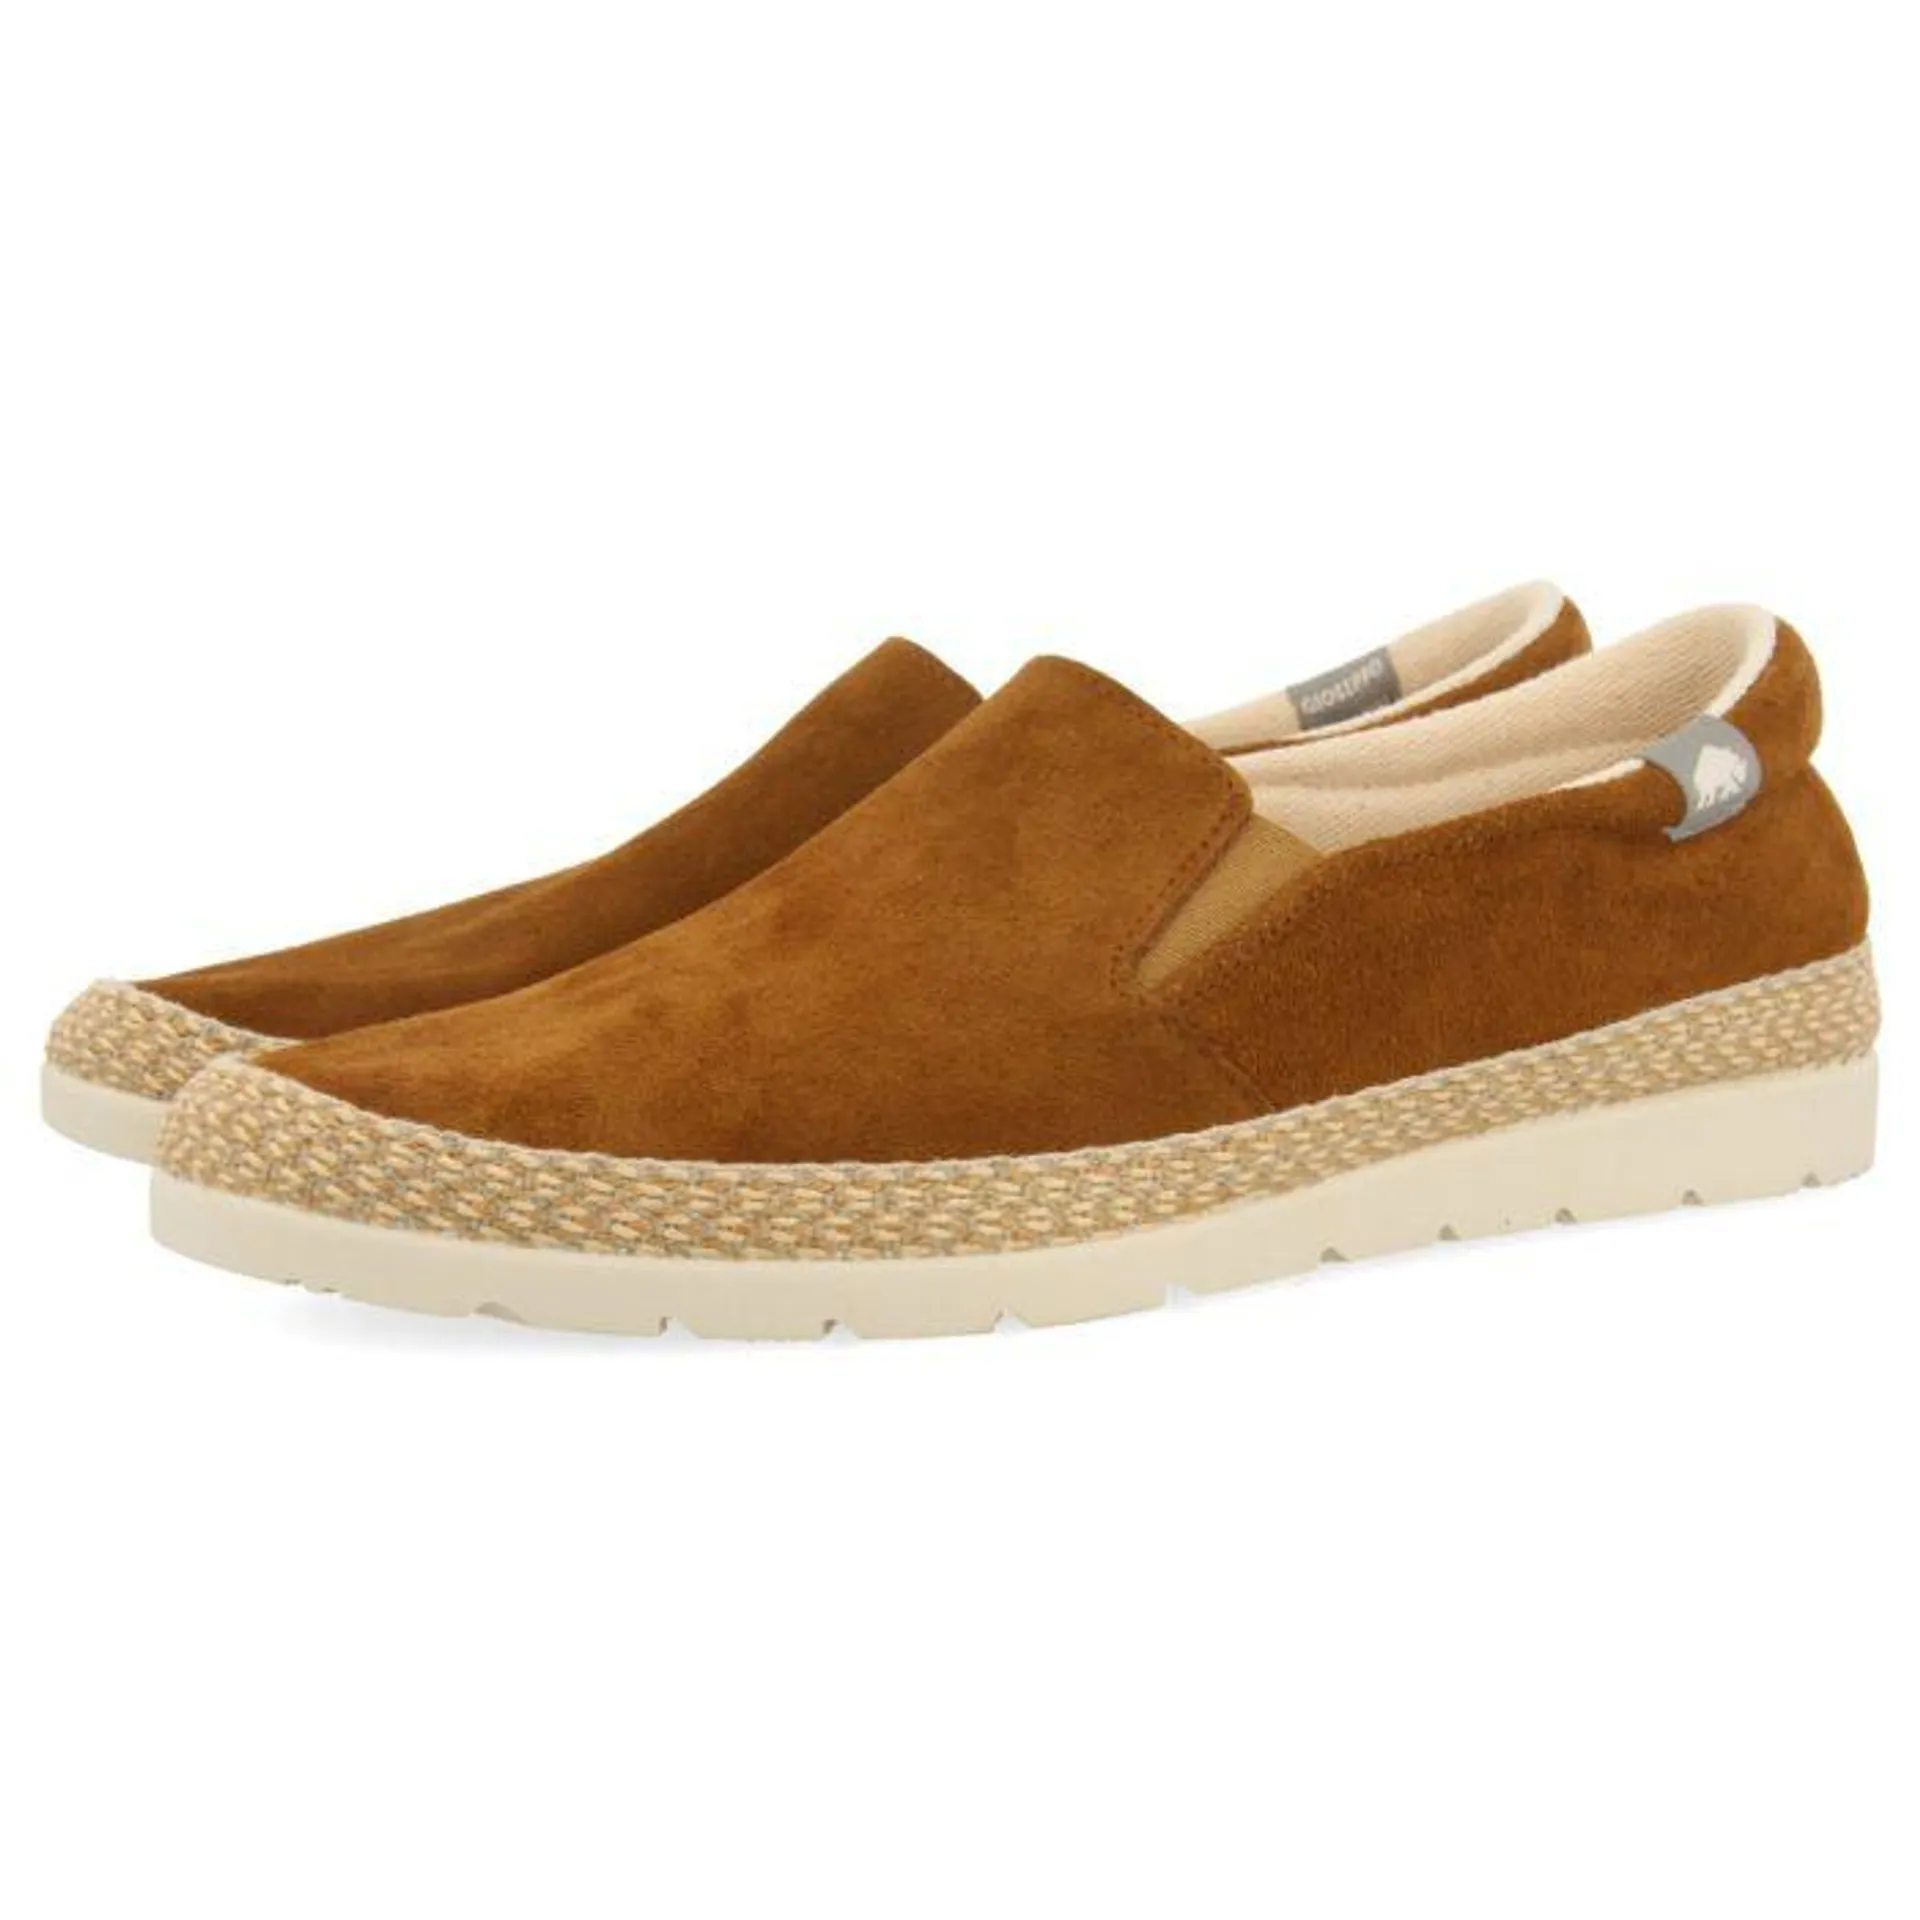 LEATHER COLOR ESPADRILLES WITH ELASTICS AND RECYCLED COTTON FOR MEN PROGER